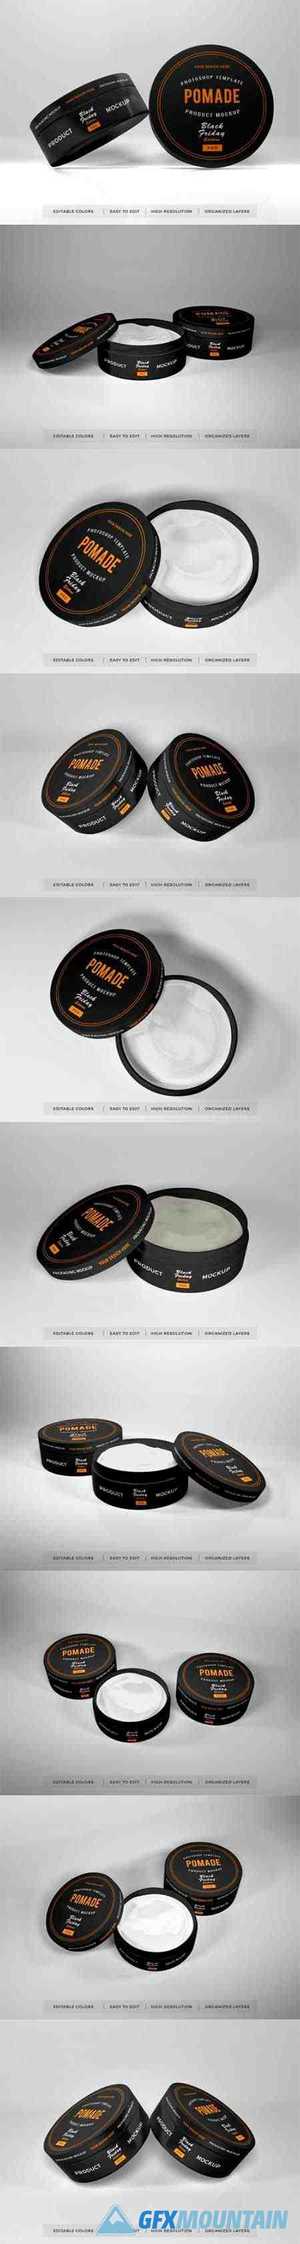 Realistic round box packaging mockup